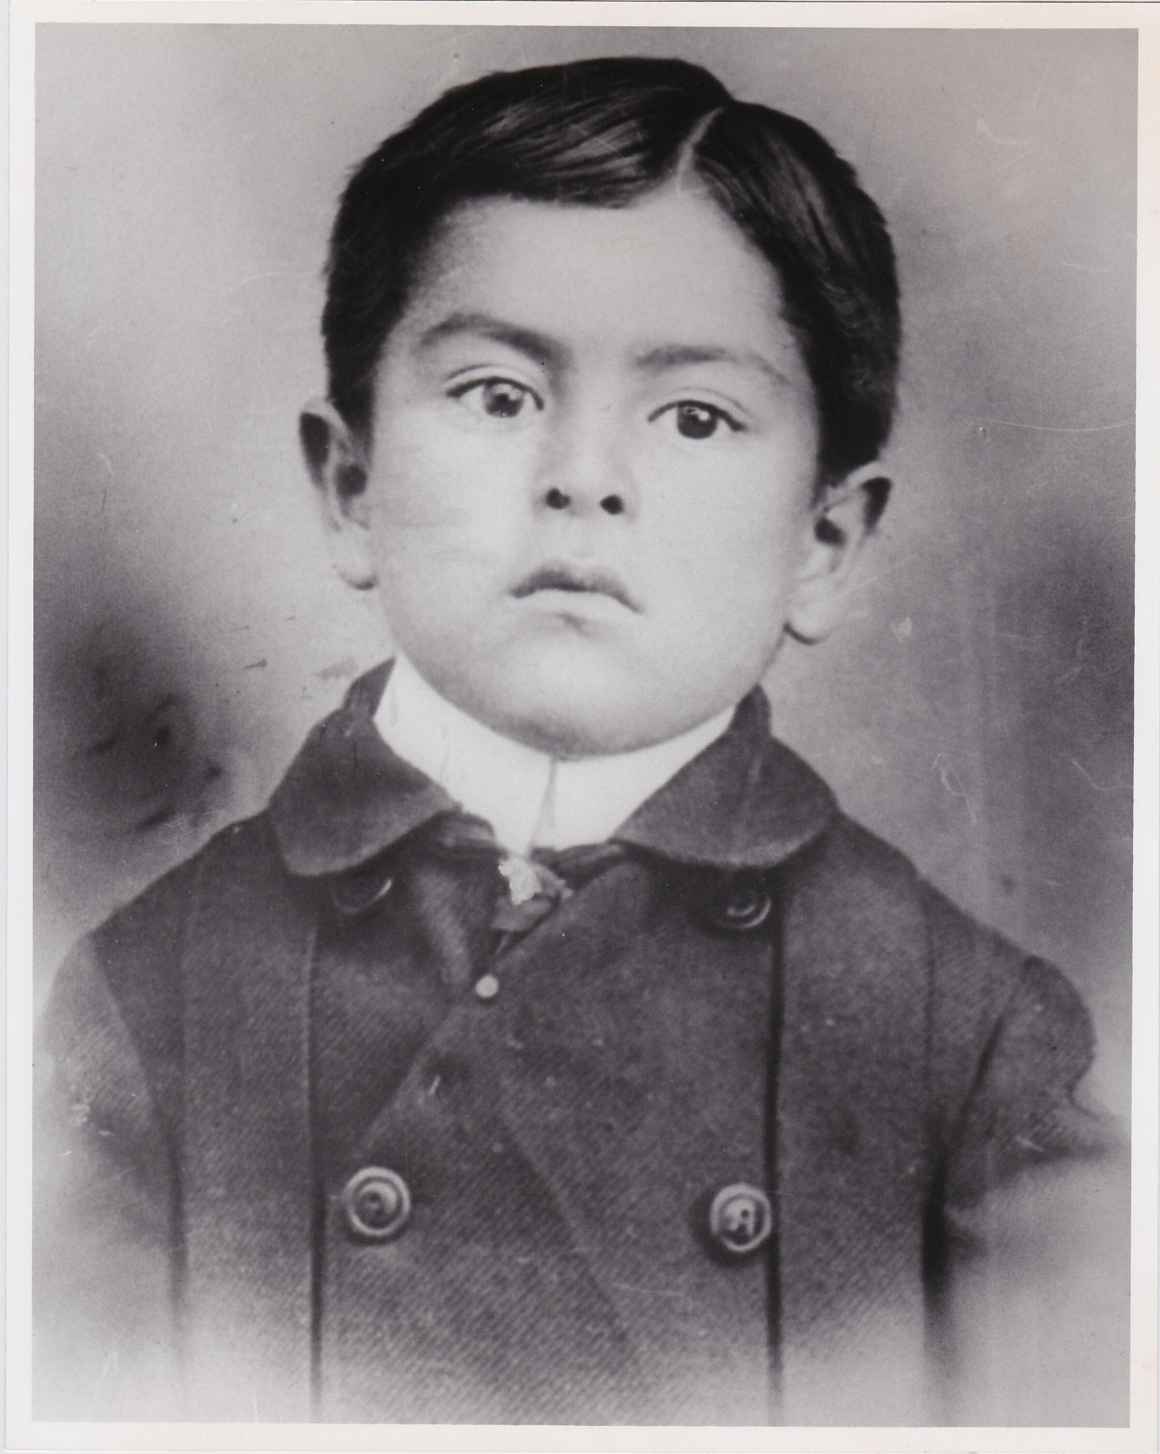 Black and white portrait photograph of a young child